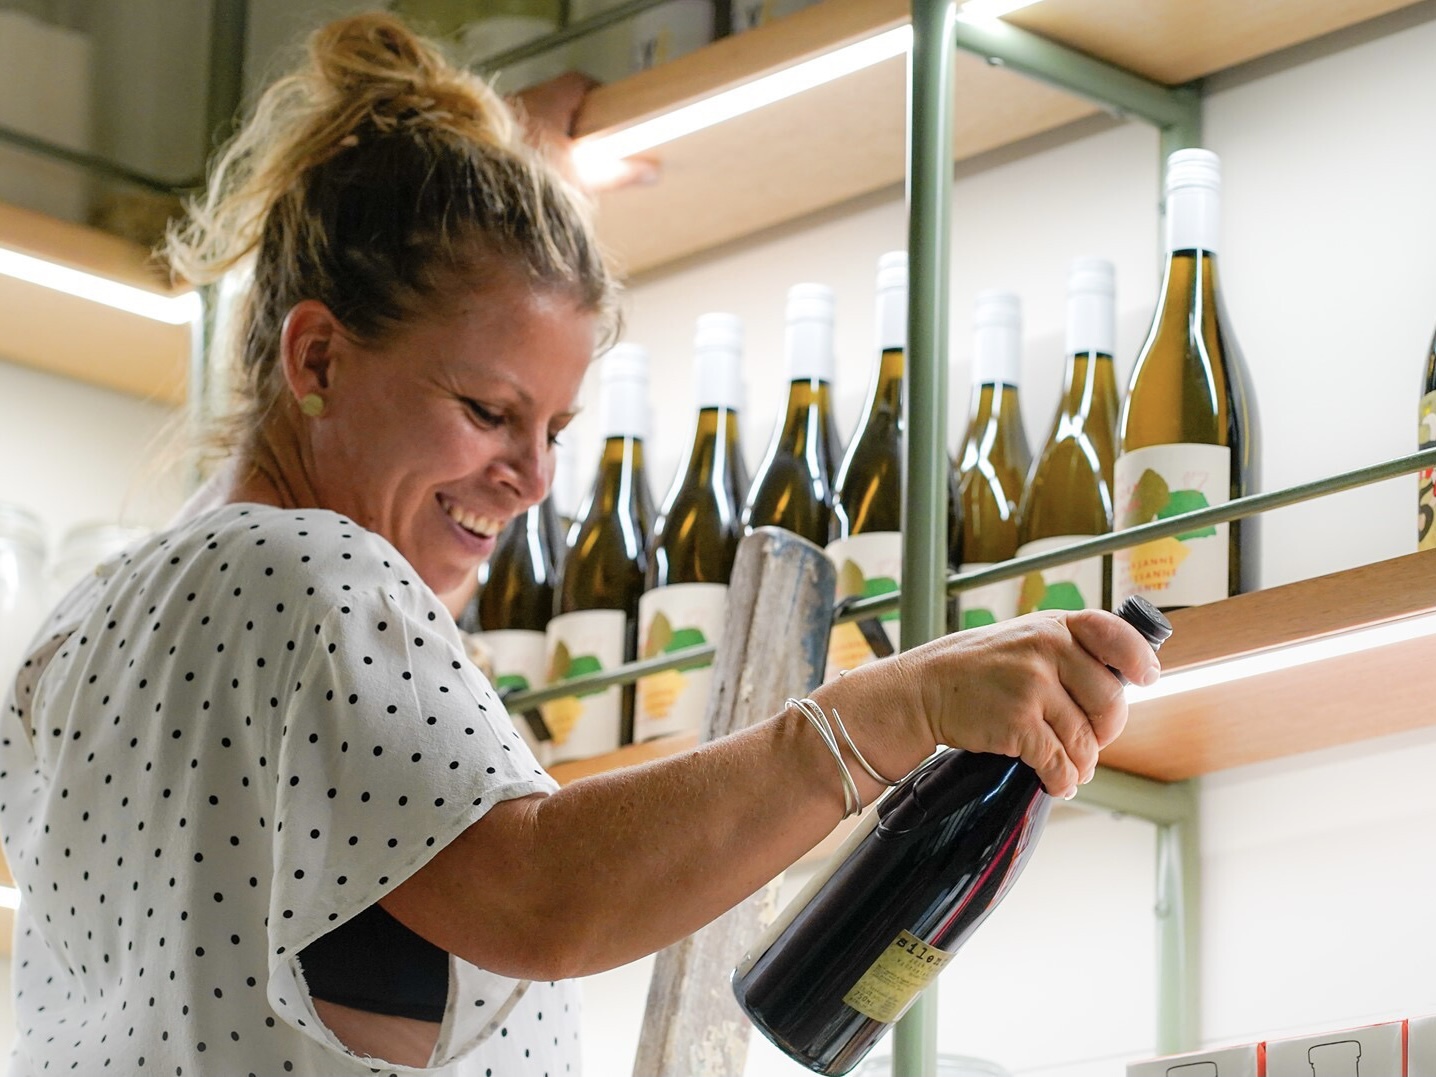 A woman pulling a bottle of wine down from a shelf